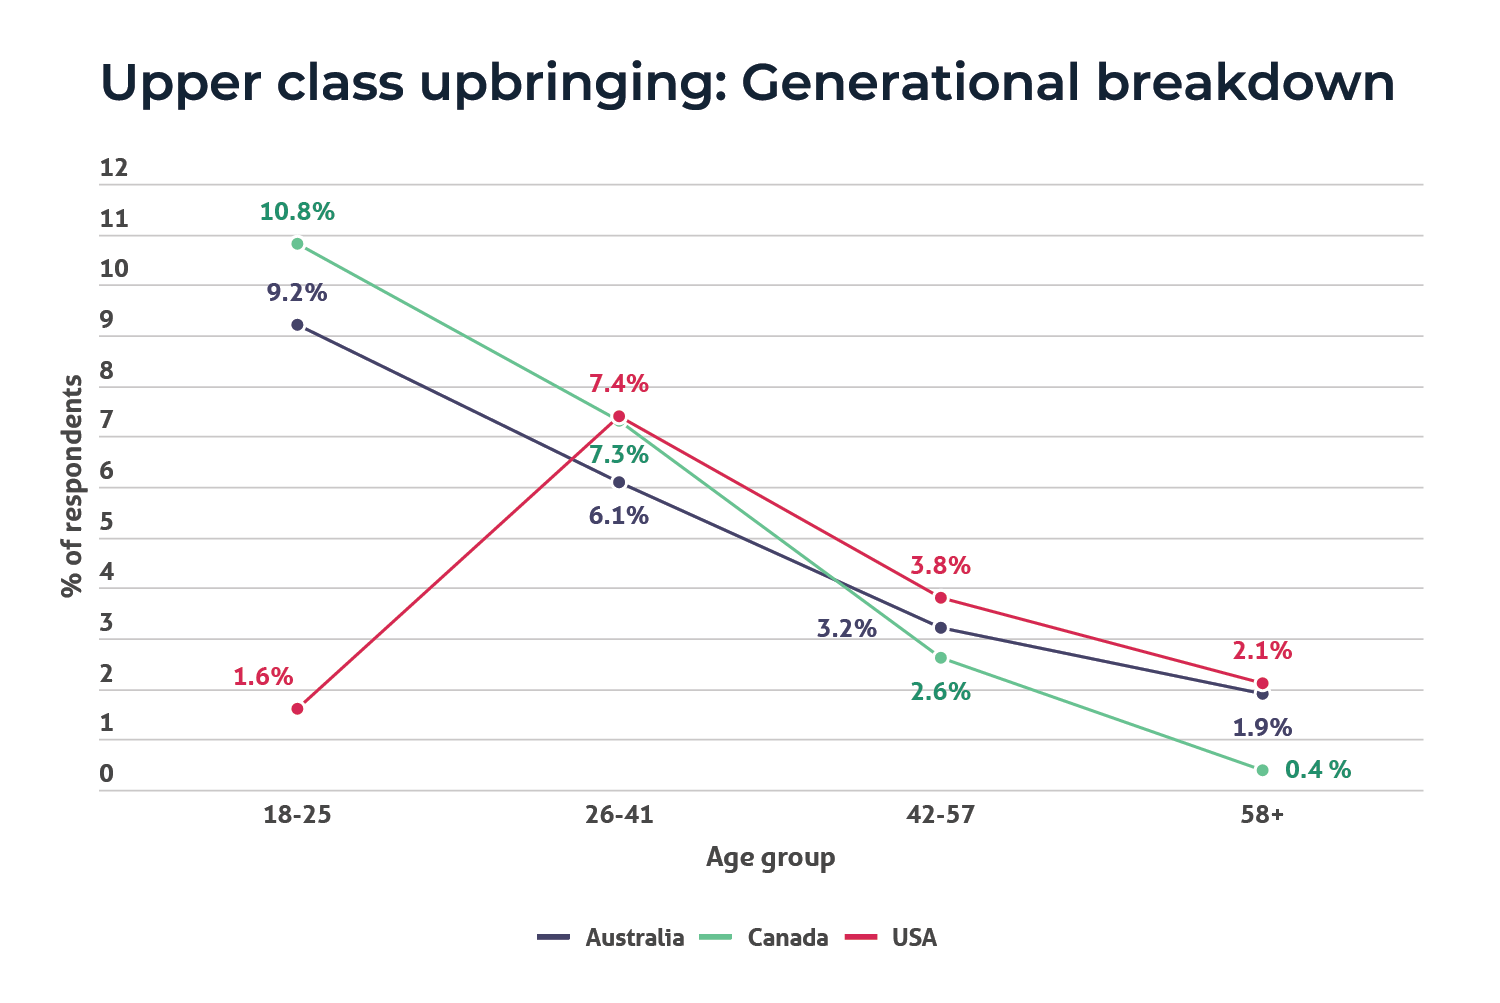 A line chart showing the percentage of different age groups in Australia, America and Canada who were born and raised upper class